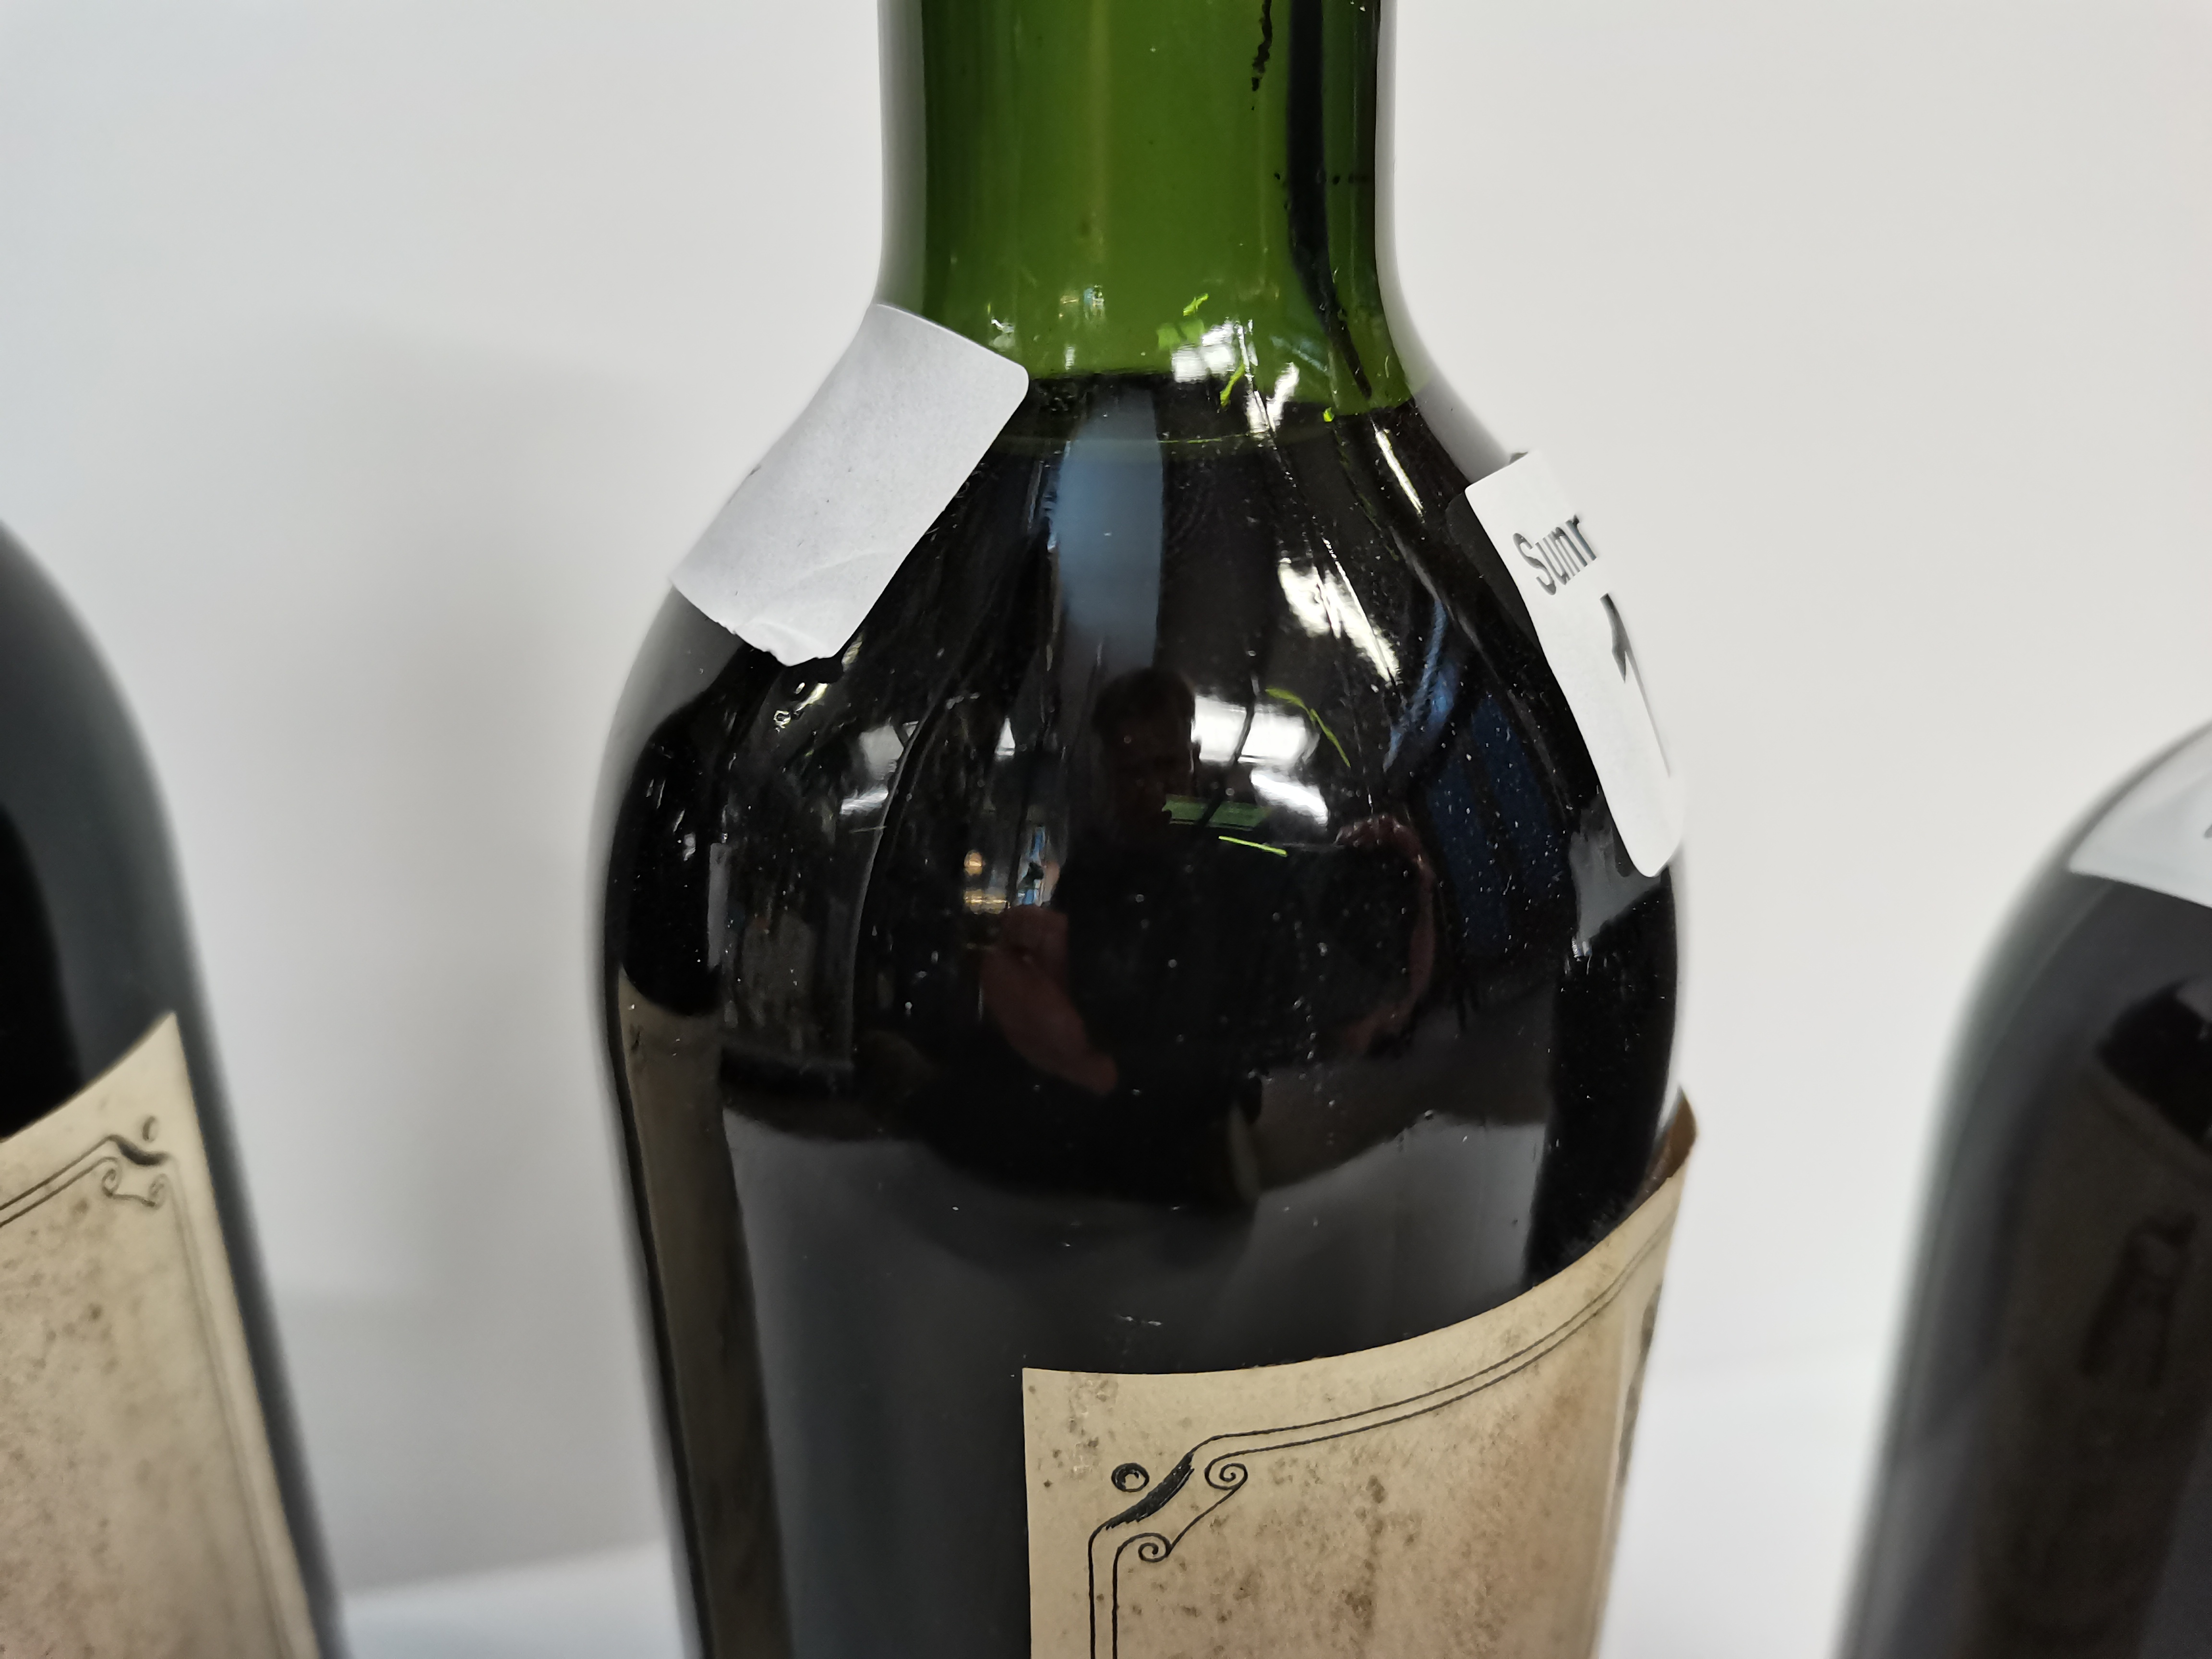 x2 bottles of Grand vin de Chateau Latour 1958 and a bottle of Dows port - Image 2 of 12